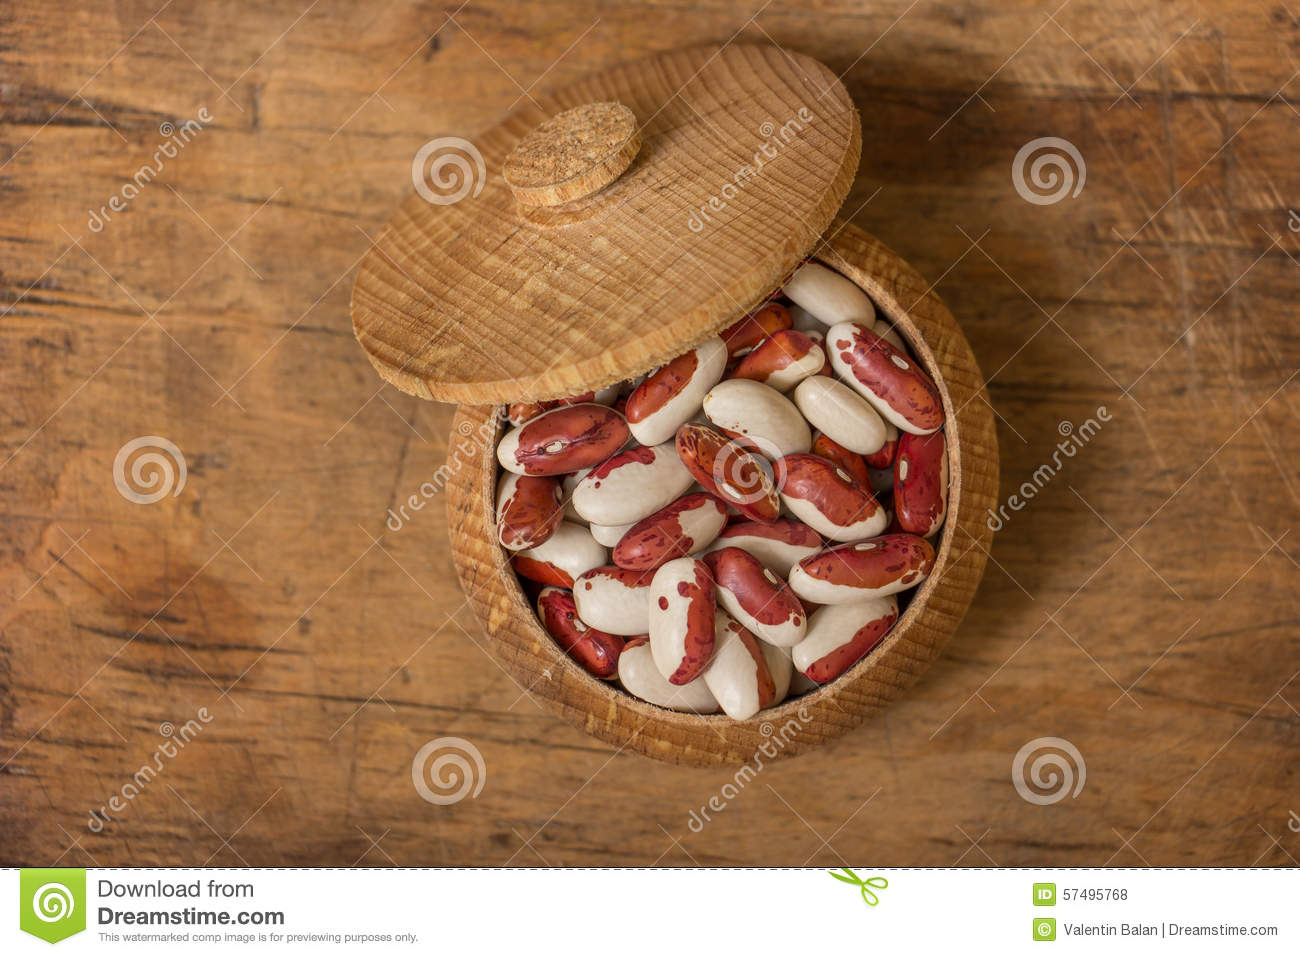 Kidney Beans On A Old Wooden Background  Rustic Arrangement